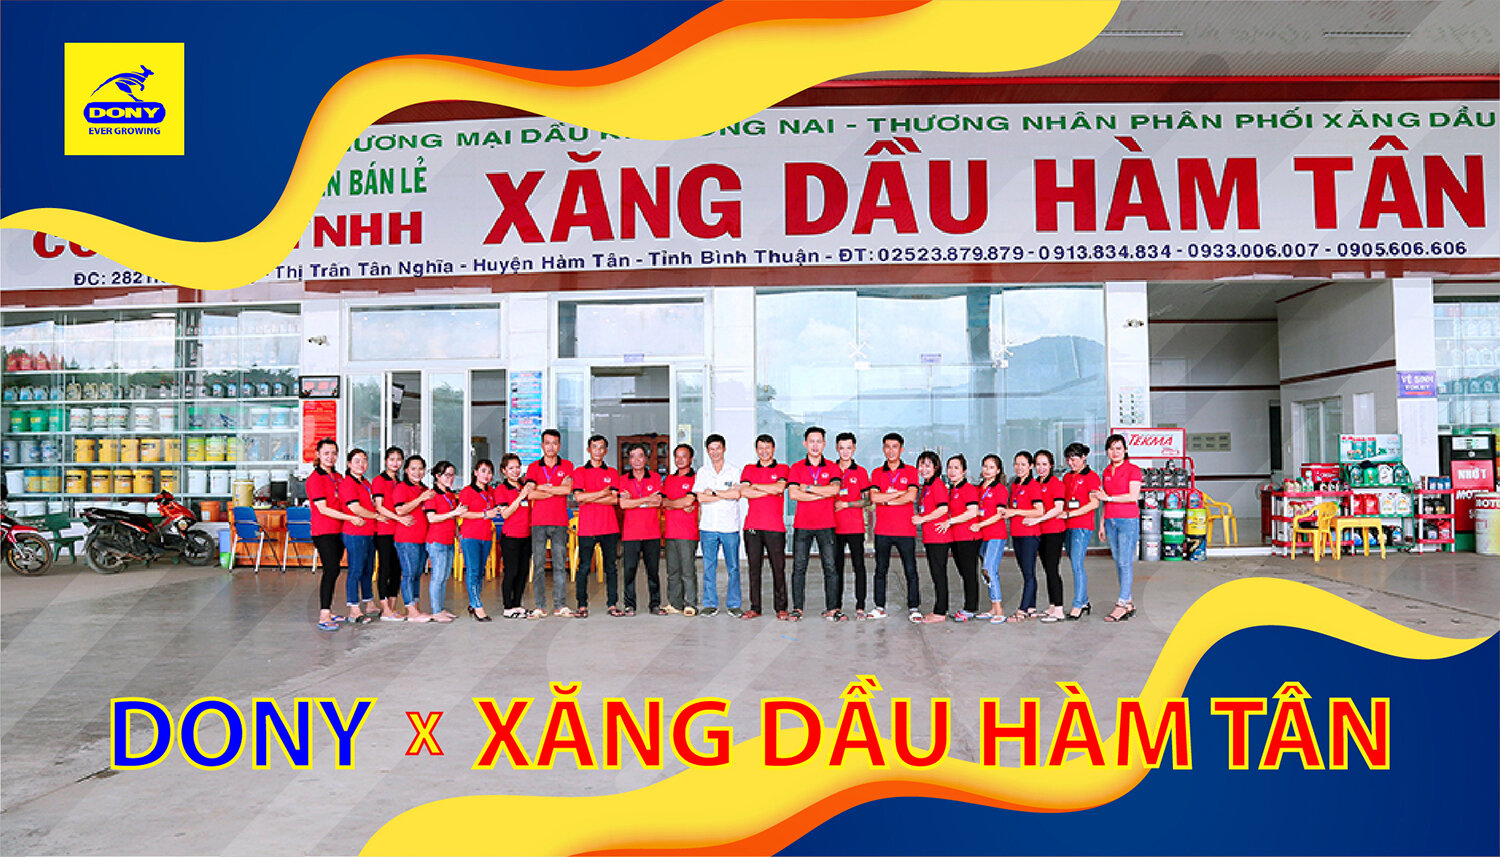 - HAM TAN PETROLEUM CO., LTD, DONY'S LONGTIME CUSTOMERS, CONTINUING TO ORDER UNIFORMS IN 2022